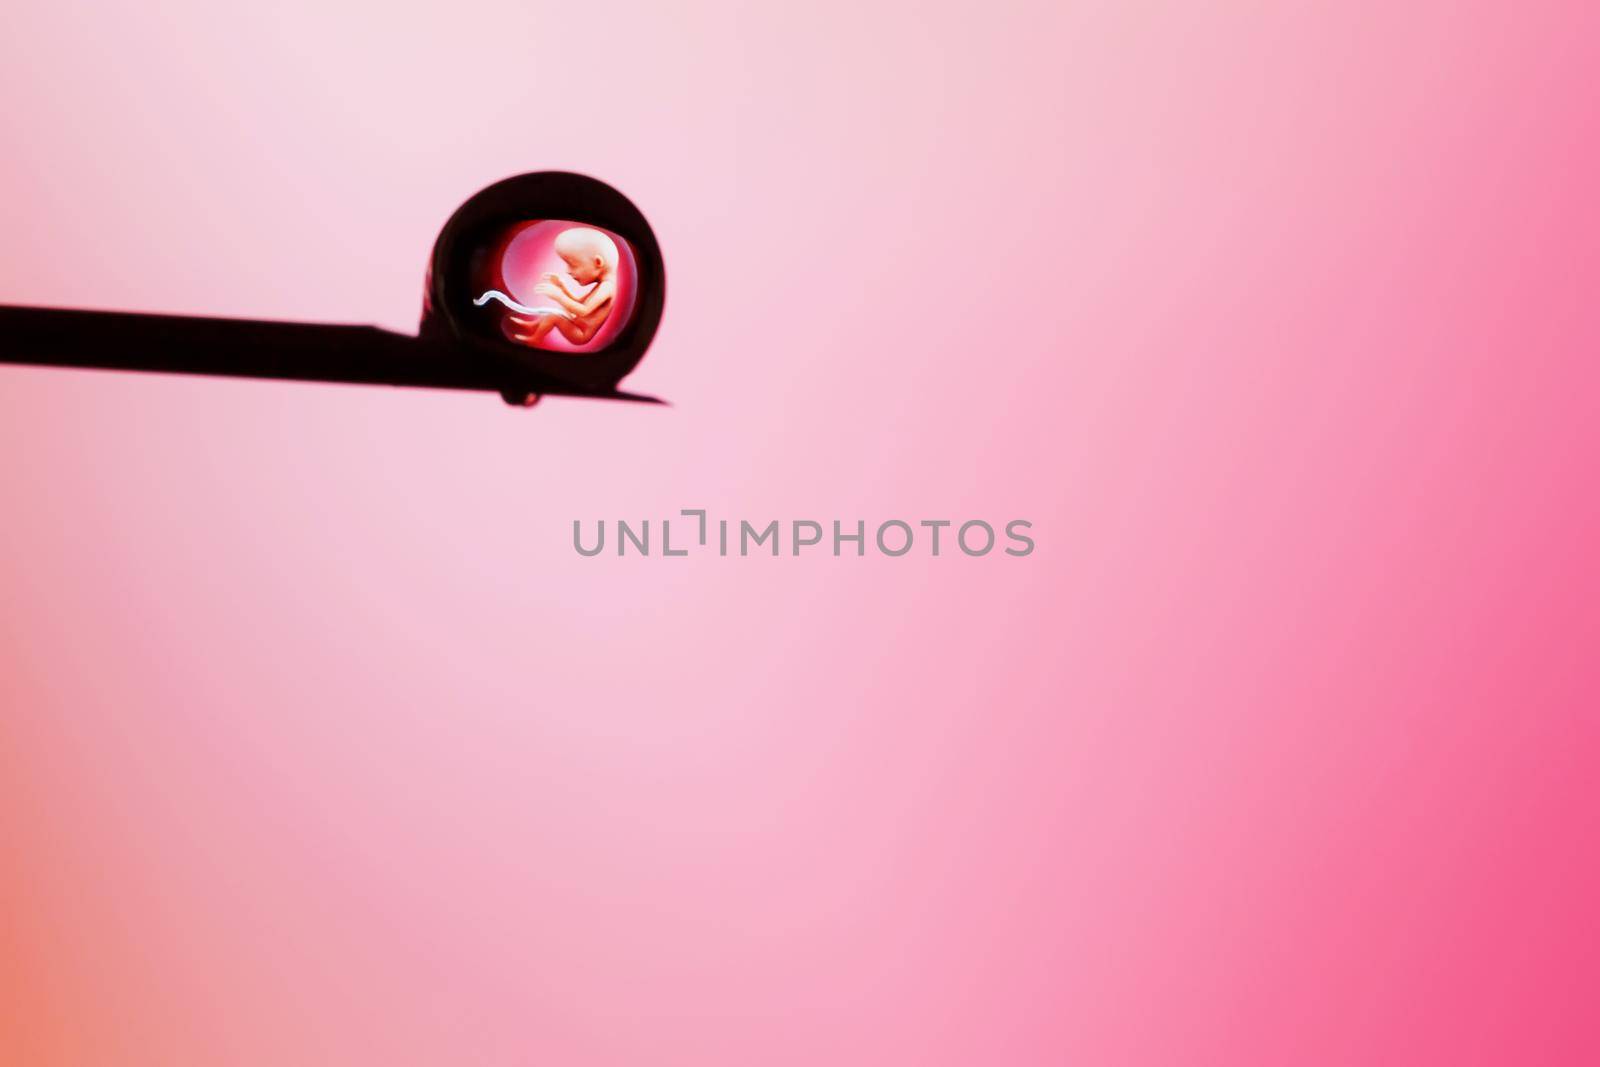 Human embryo in a drop on the tip of a needle on a pink background. Artificial insemination. Test tube baby, IVF. illustrative editorial